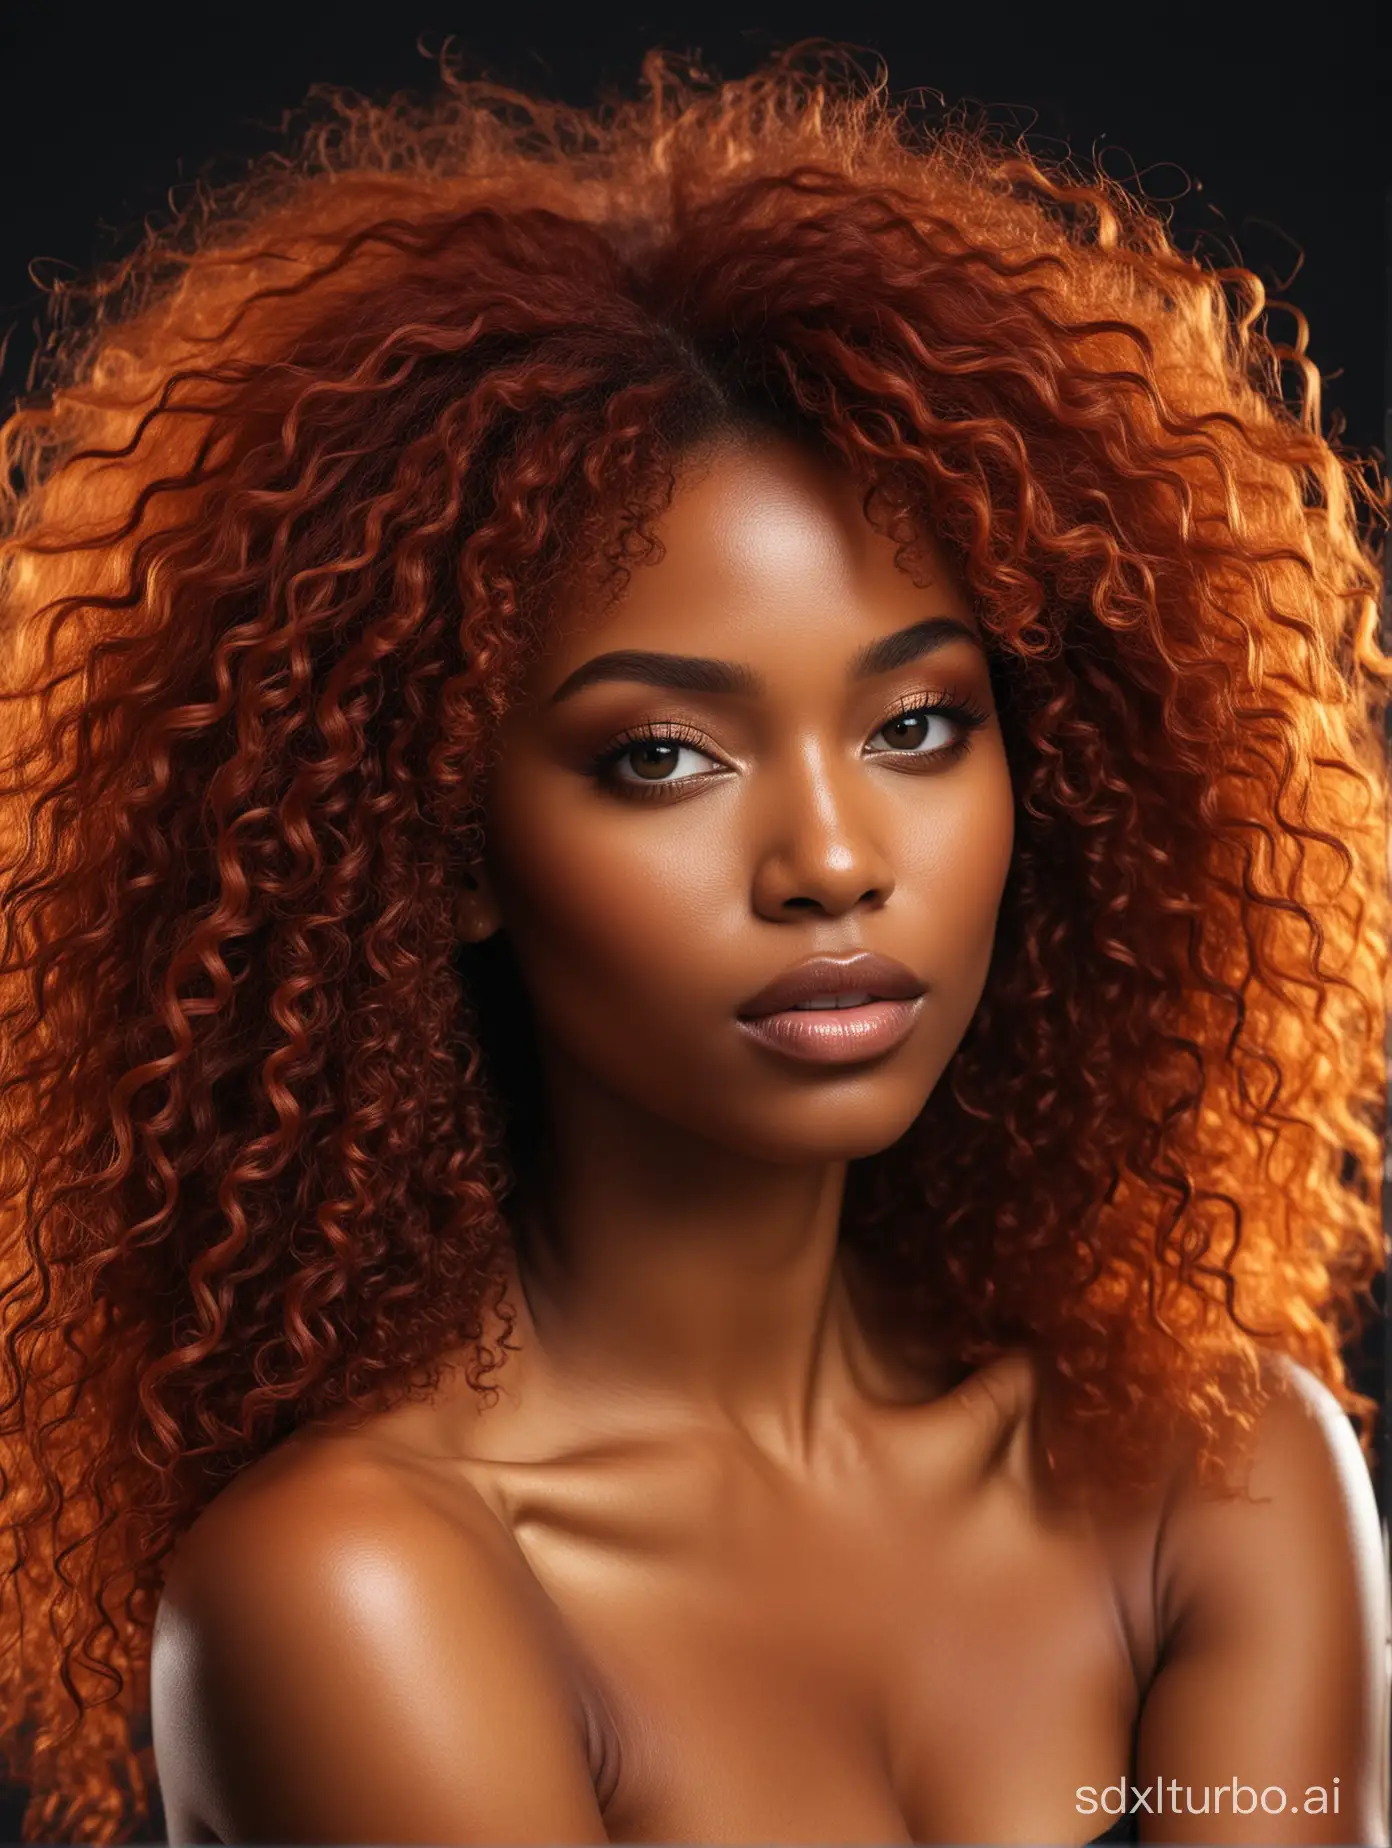 Vibrant-RedHaired-Woman-with-EmberLike-Aura